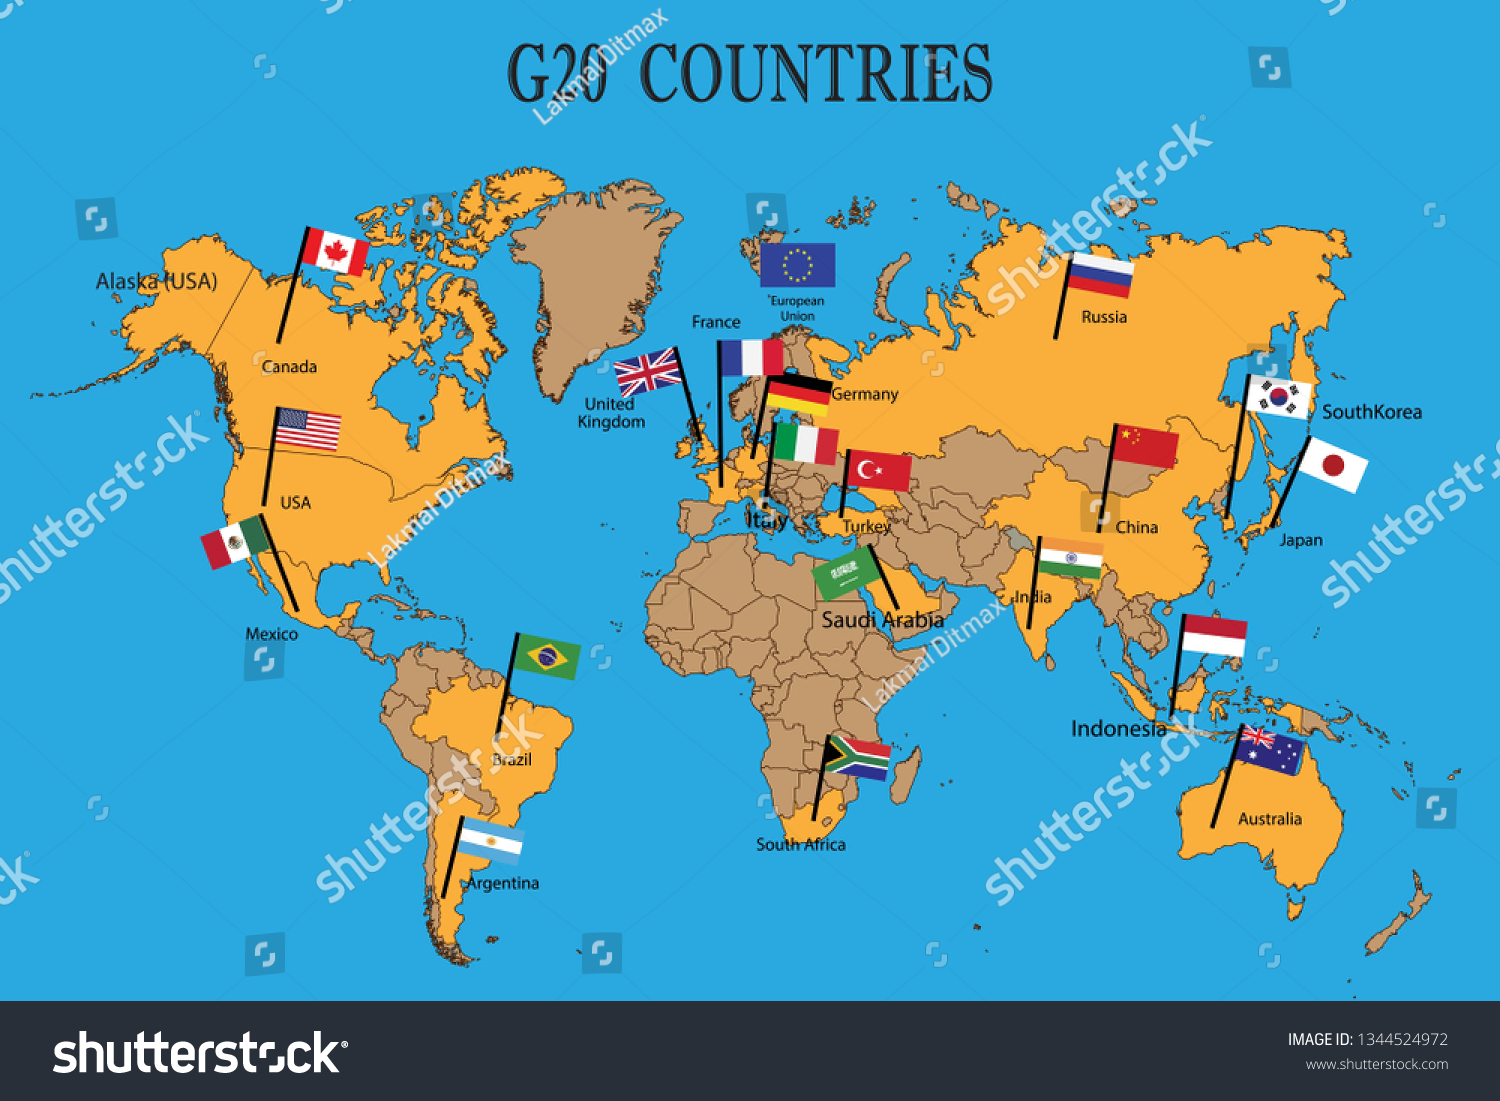 World Map G20 Countries Flags Stock Vector Royalty Free 1344524972 Shutterstock 3509